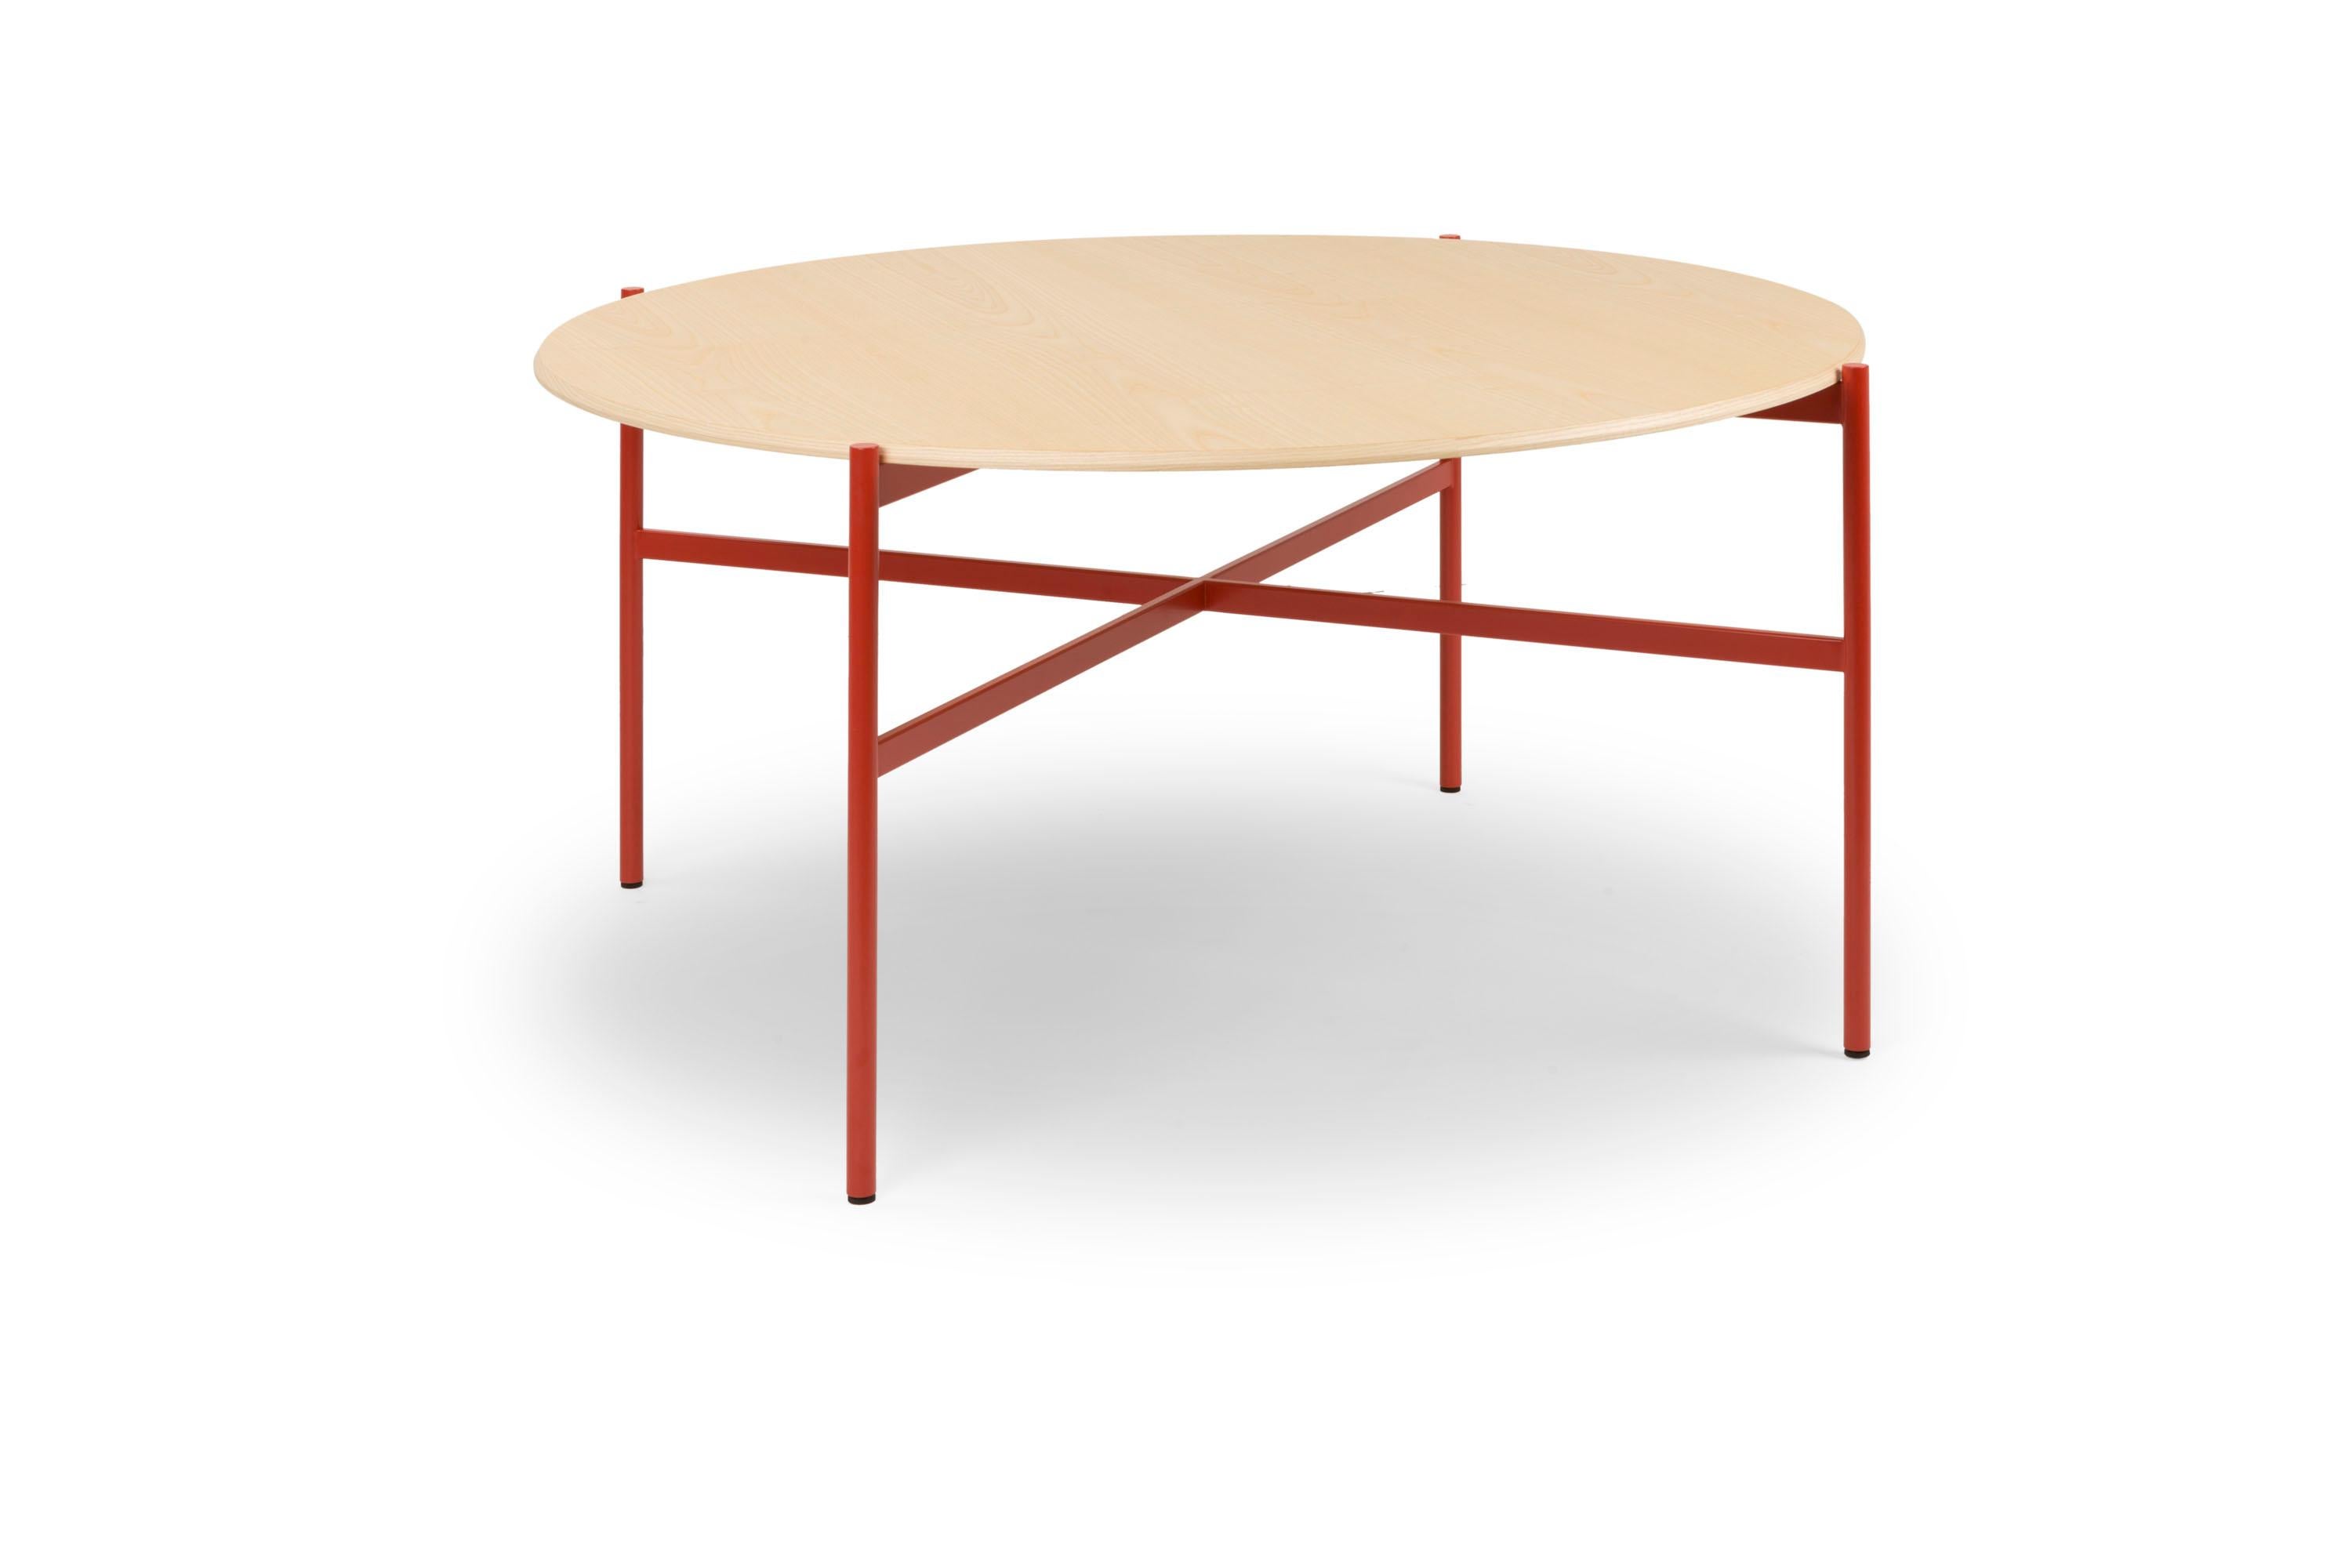 Italian 21st Century Modern Table Red MDF Top with Solid Wood Edge Blade Made in Italy For Sale